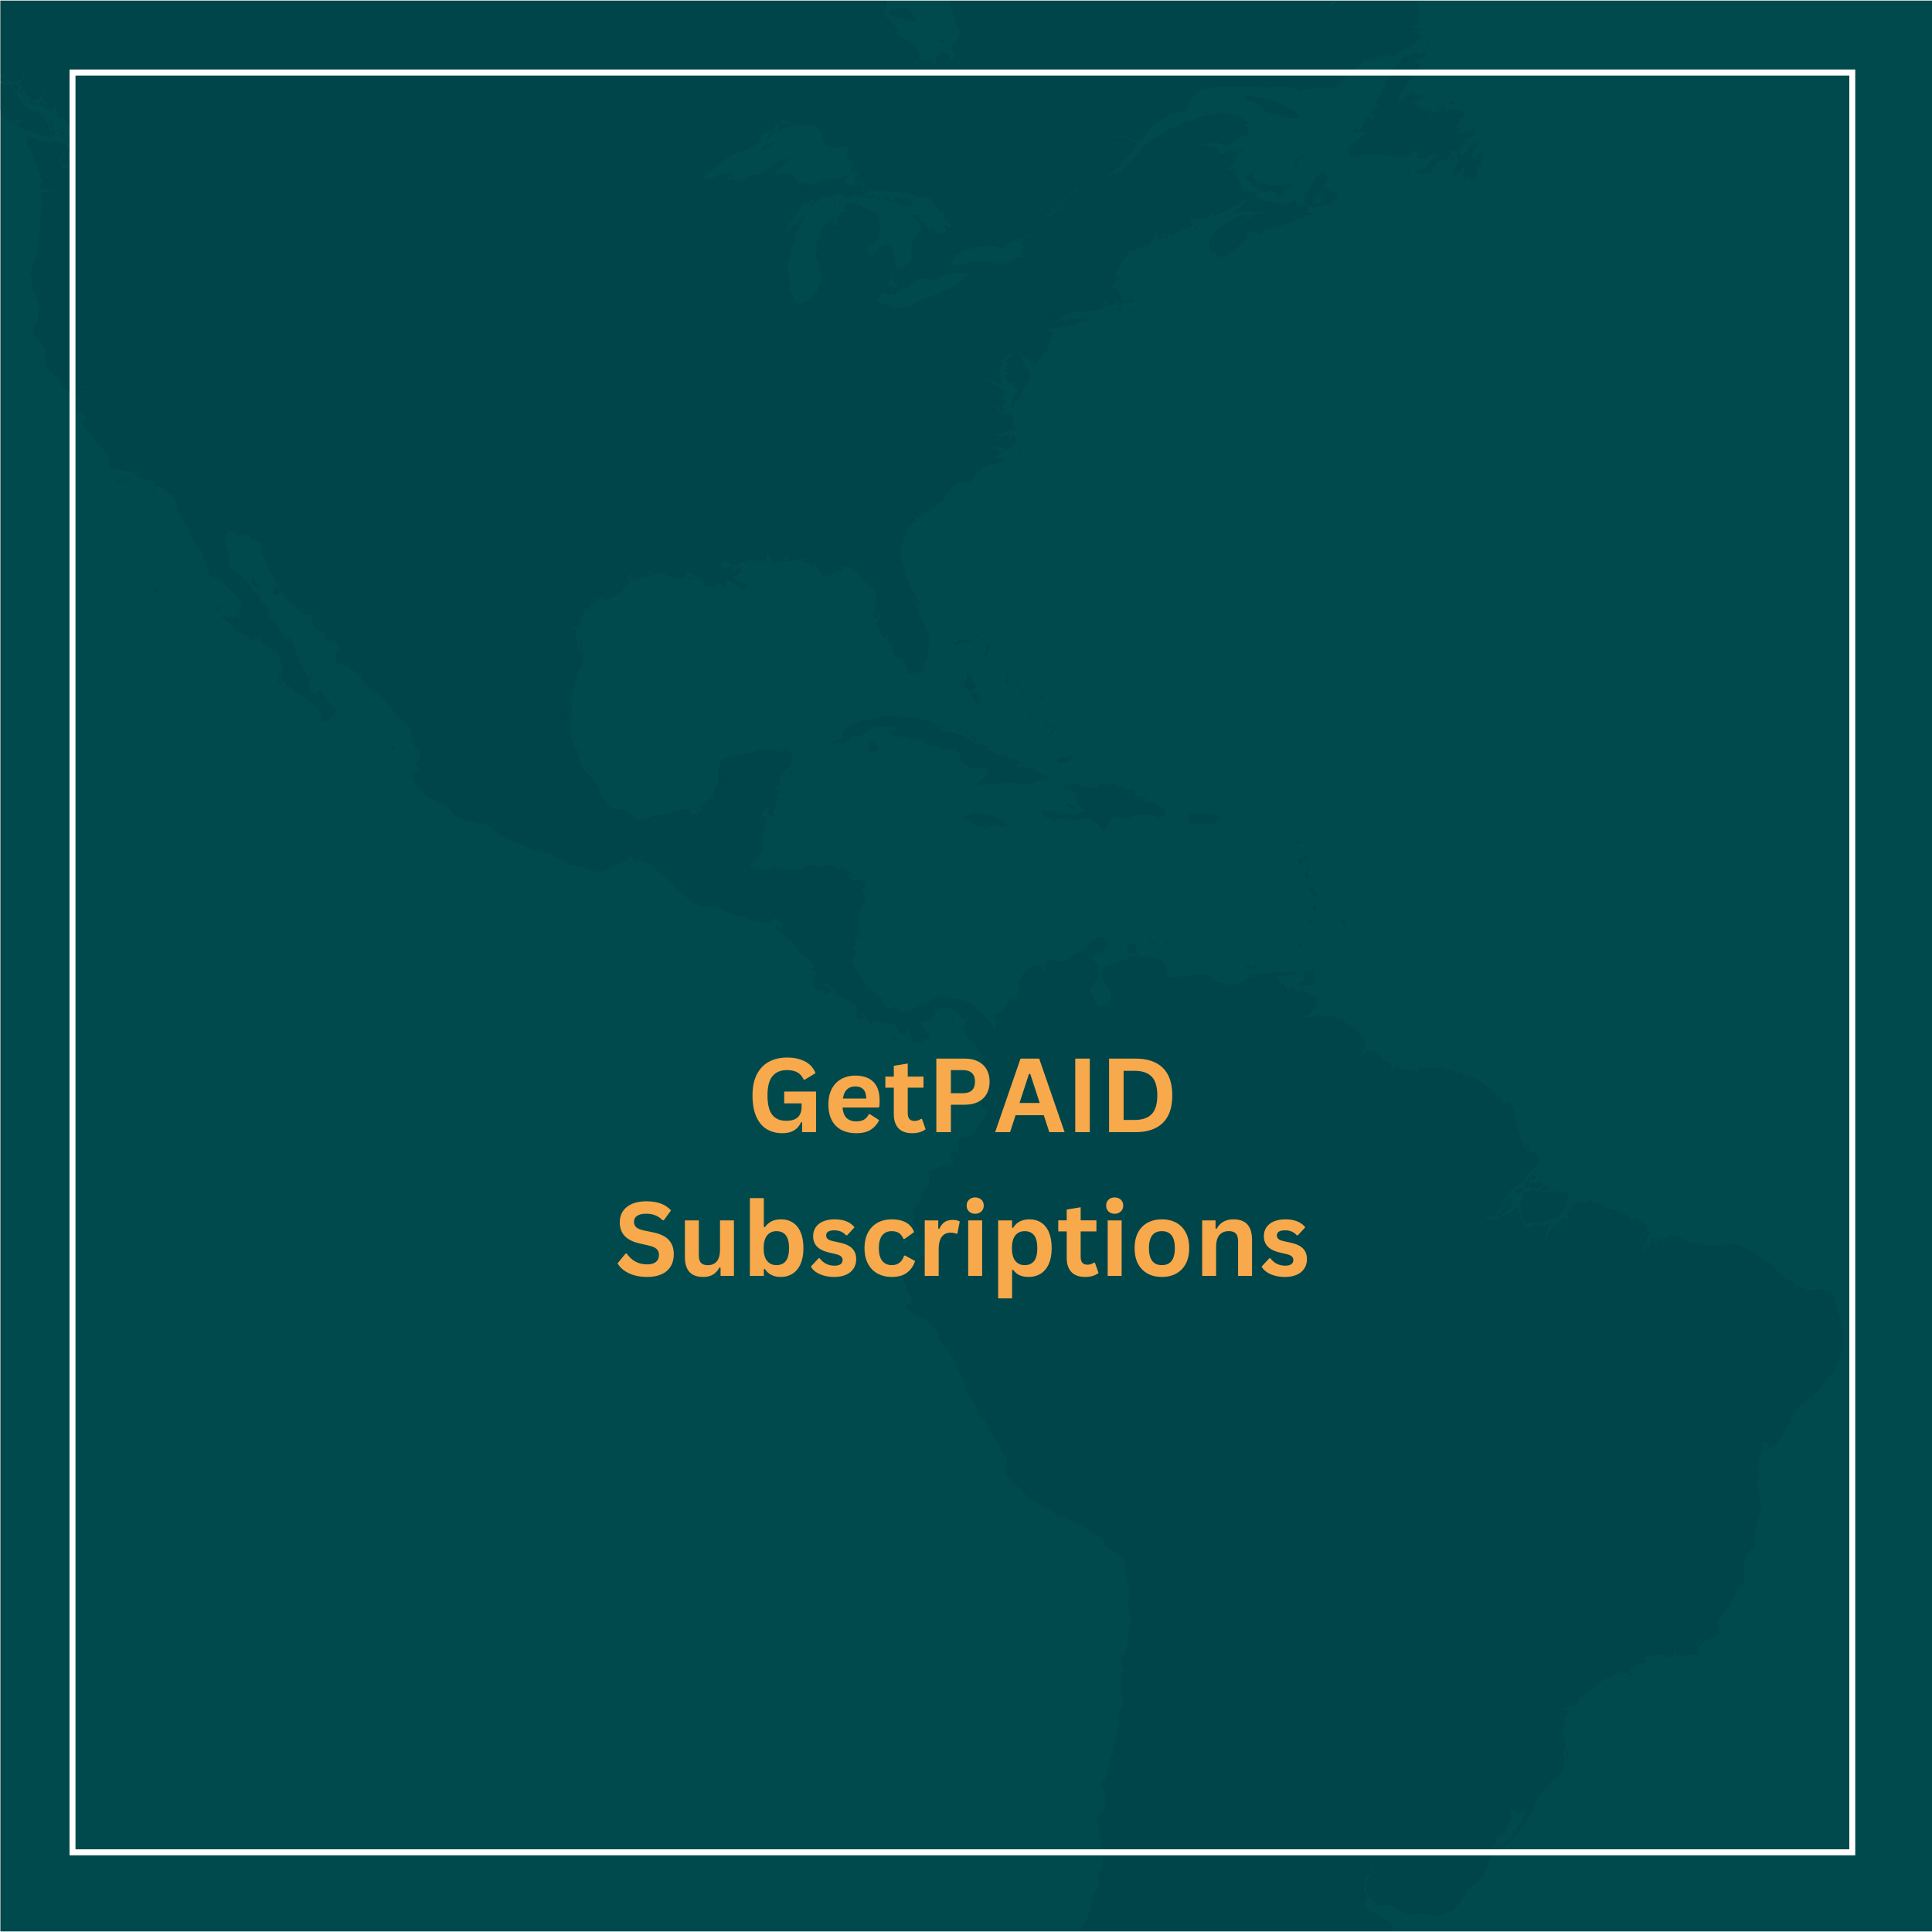 GetPAID Subscriptions